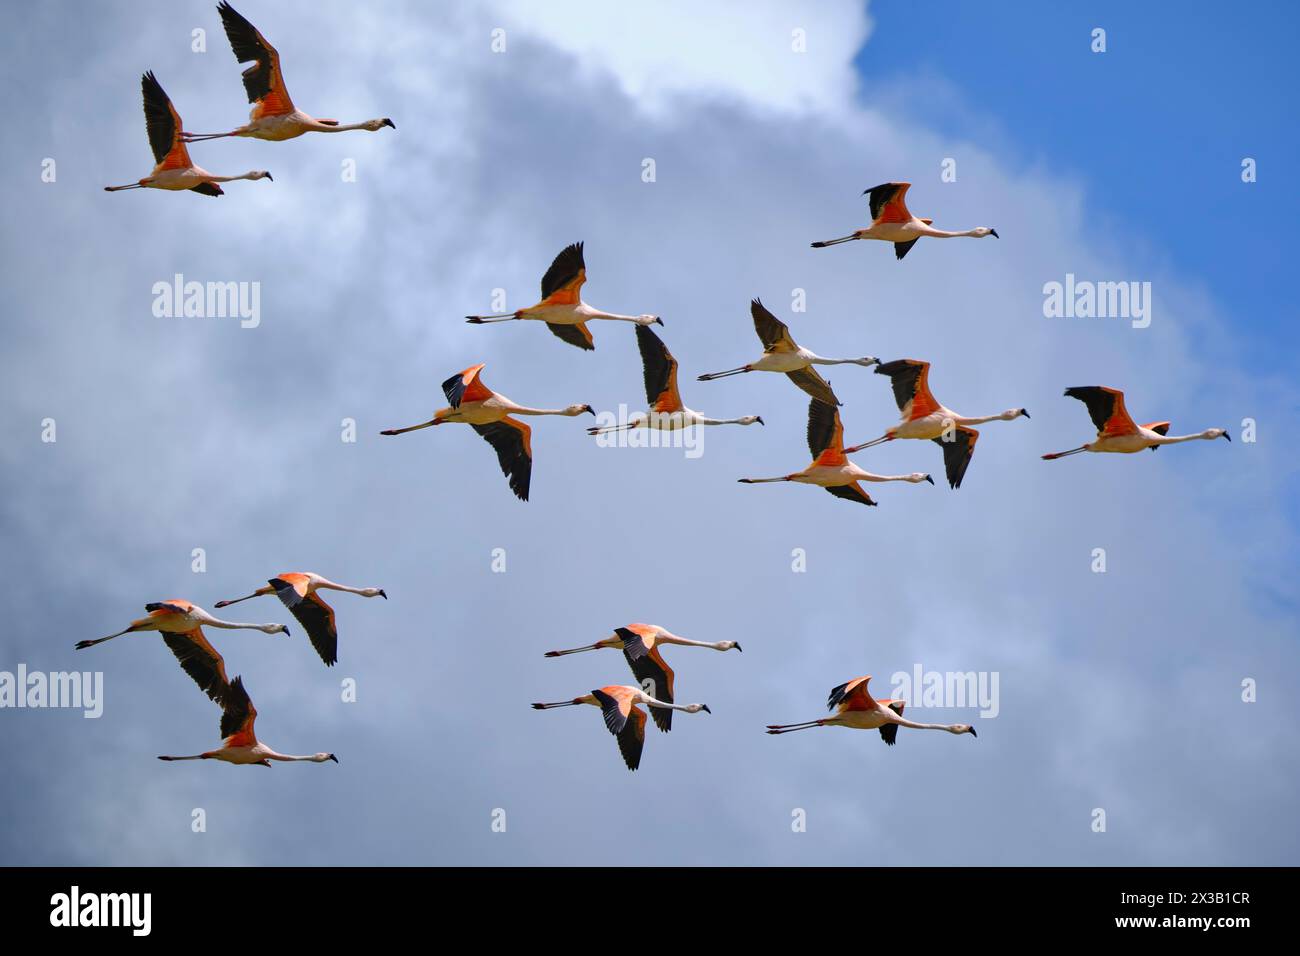 Chilean Flamingo (Phoenicopterus chilensis), beautiful group of flamingos flying over an Andean lake with an impressive Andean landscape in the backgr Stock Photo